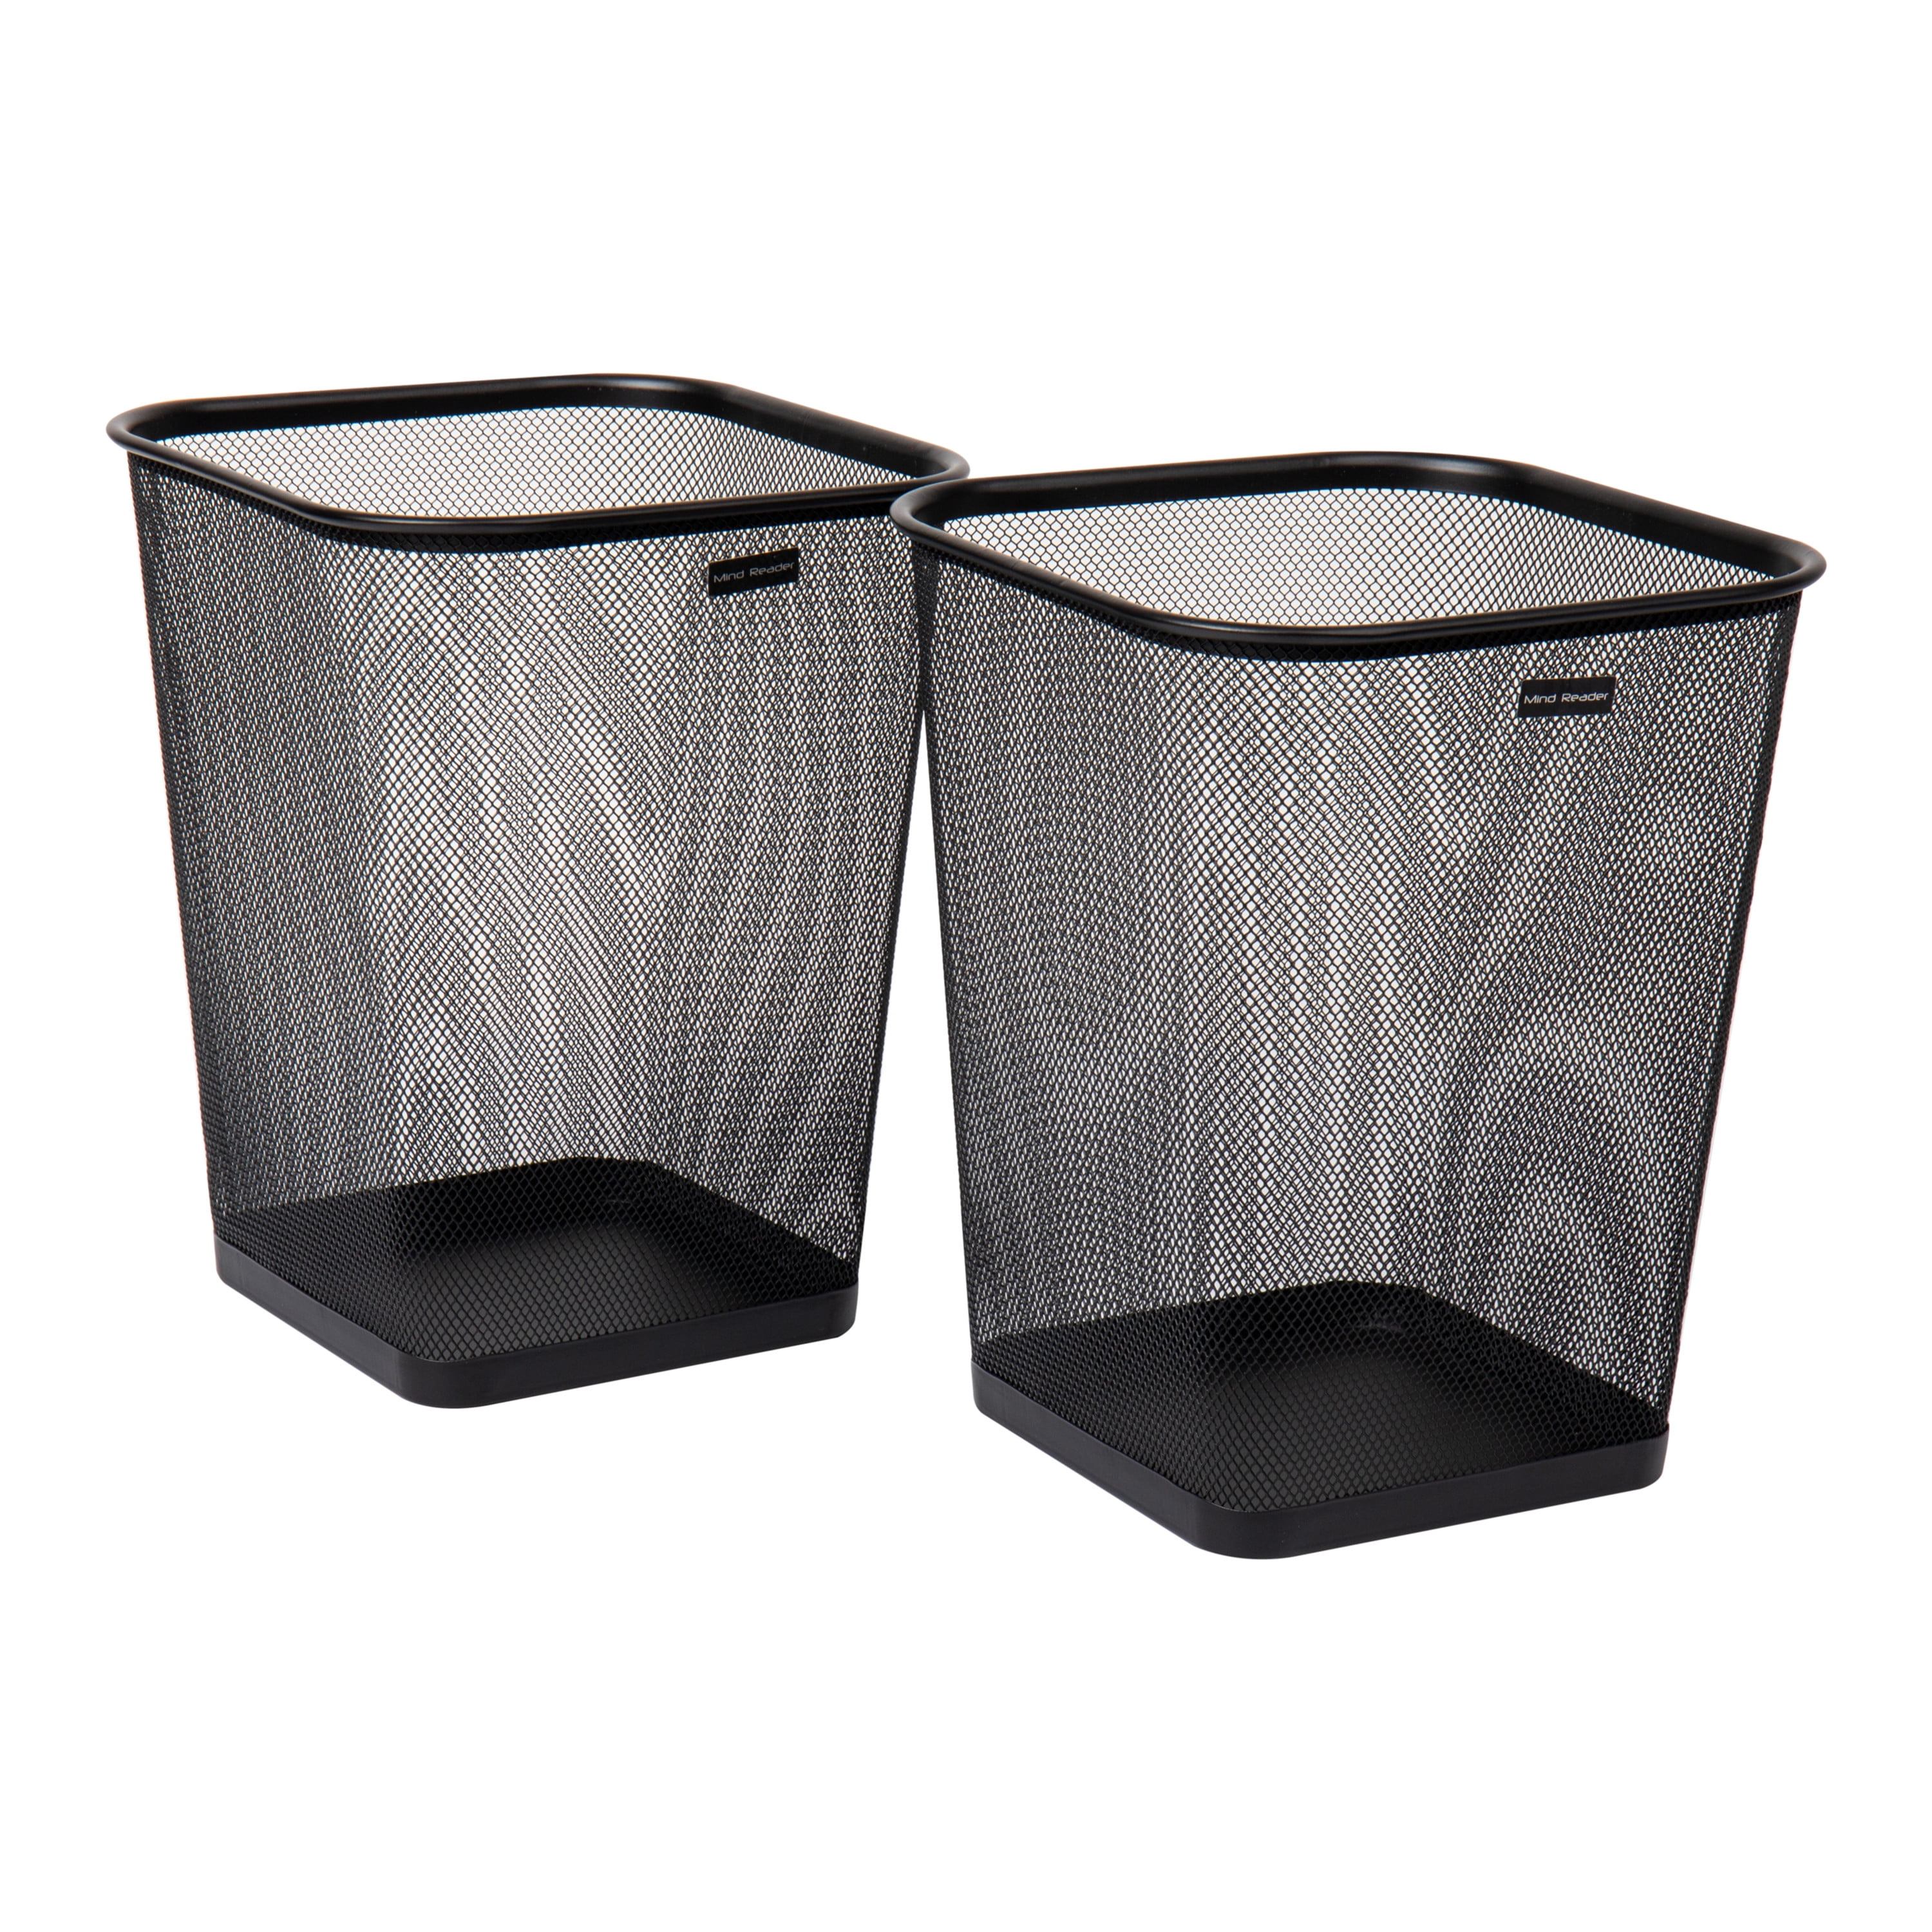 WASTE PAPER BIN METAL MESH  FOR OFFICE HOME USE BEDROOM LIGHTWEIGHT AND STURDY 